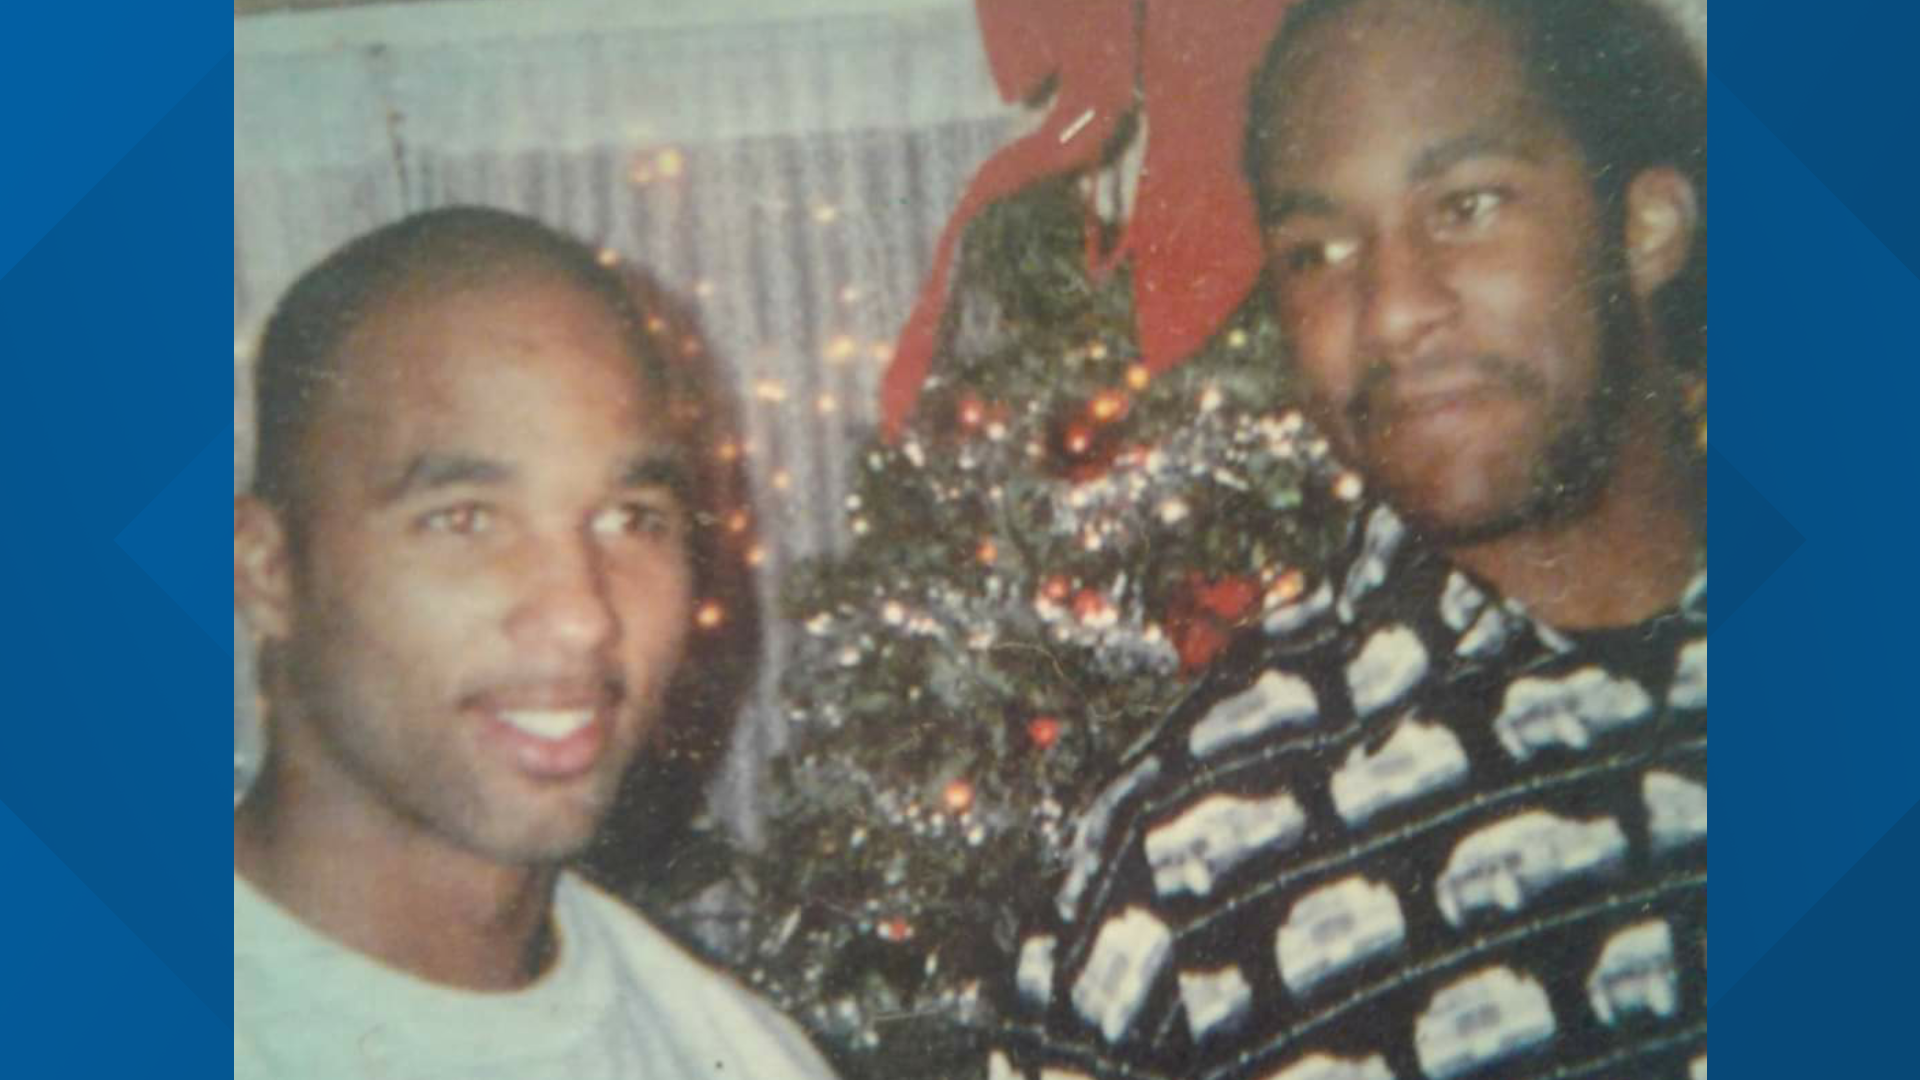 Anthony and Albert Dawson, both in their twenties, were murdered outside their grandmother's home. 18 years later, the case is unsolved.